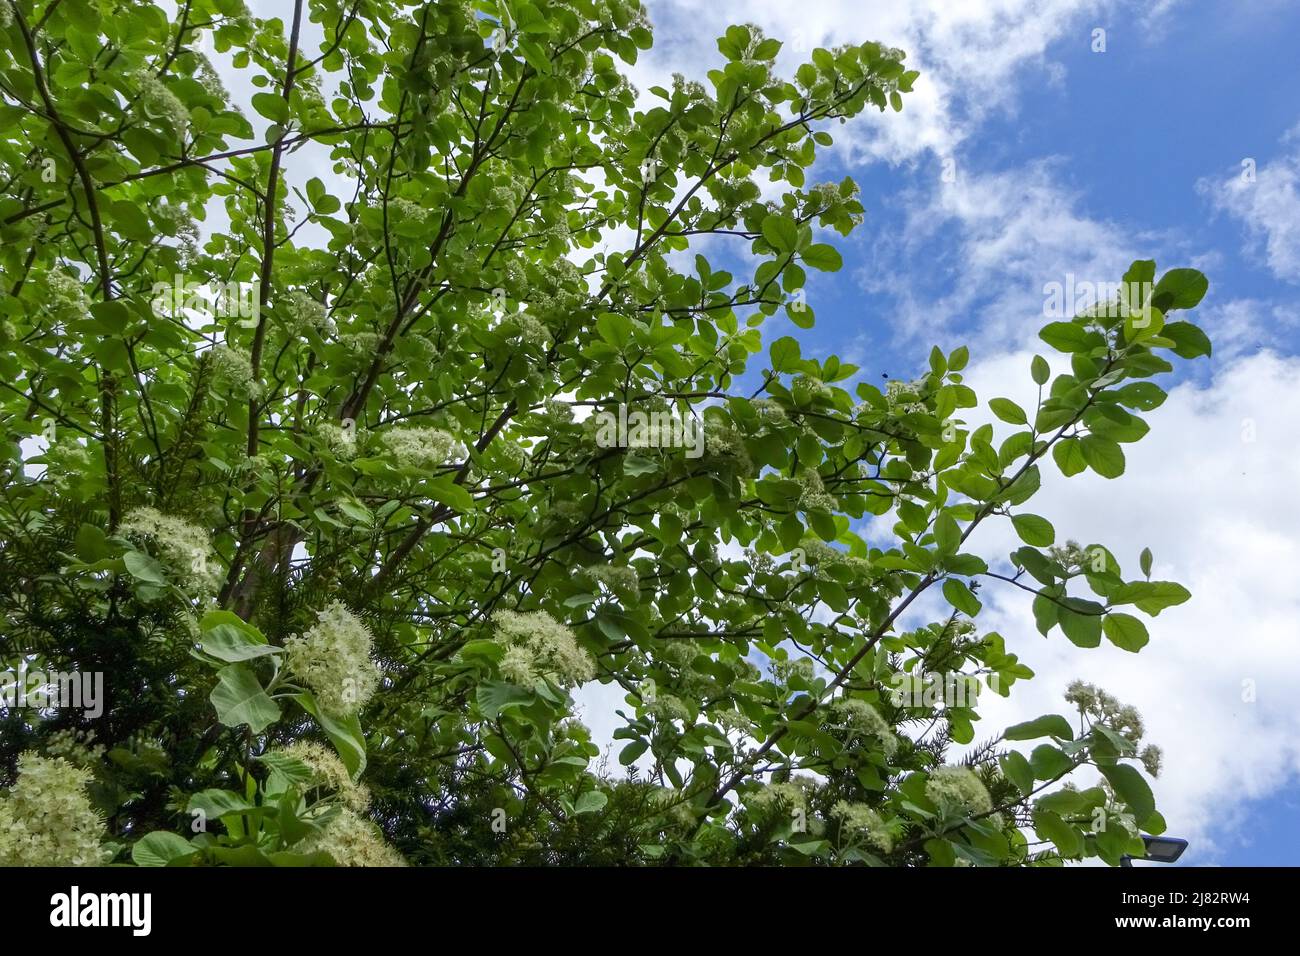 The tree, Round Leaved Whitebeam - Sorbus eminens in flower in a garden in the UK. Stock Photo